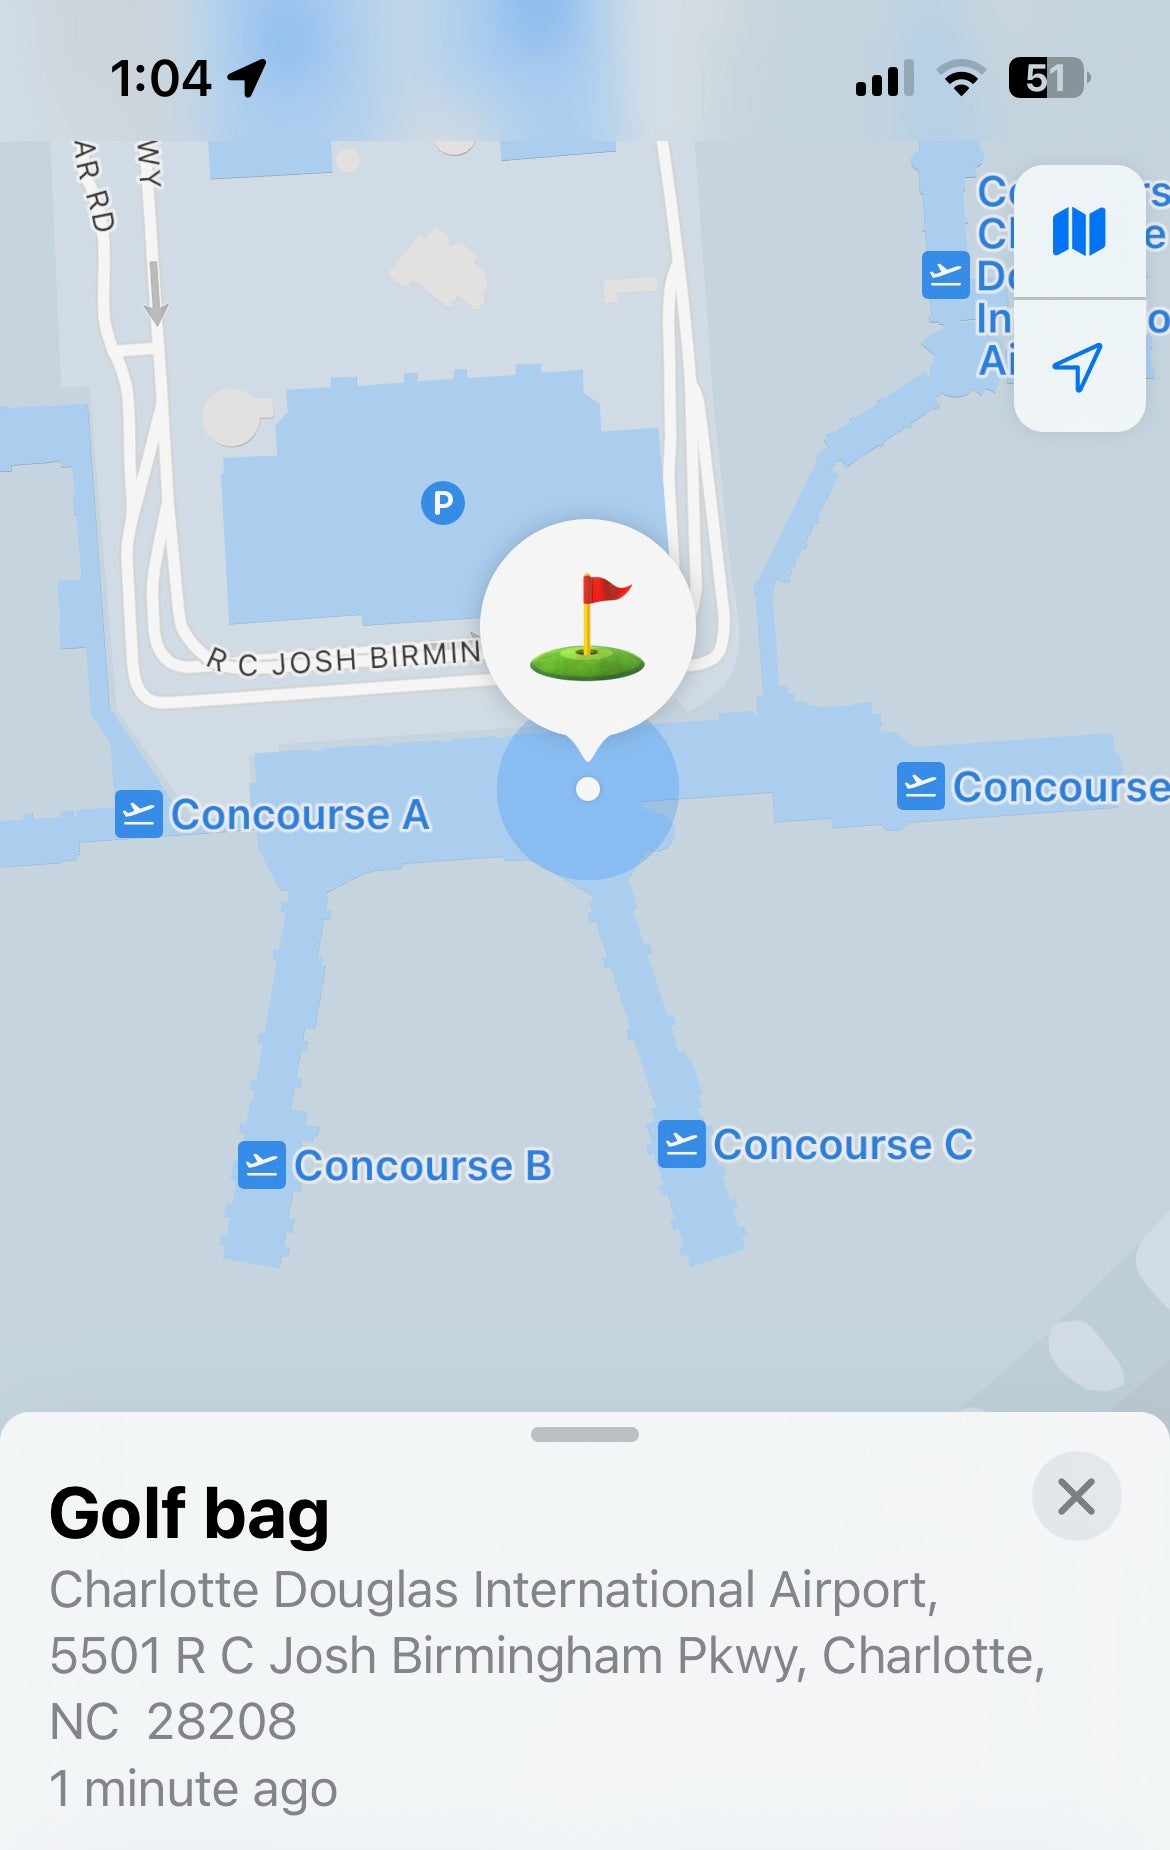 Golf bag located on Apple AirTag at CLT airport